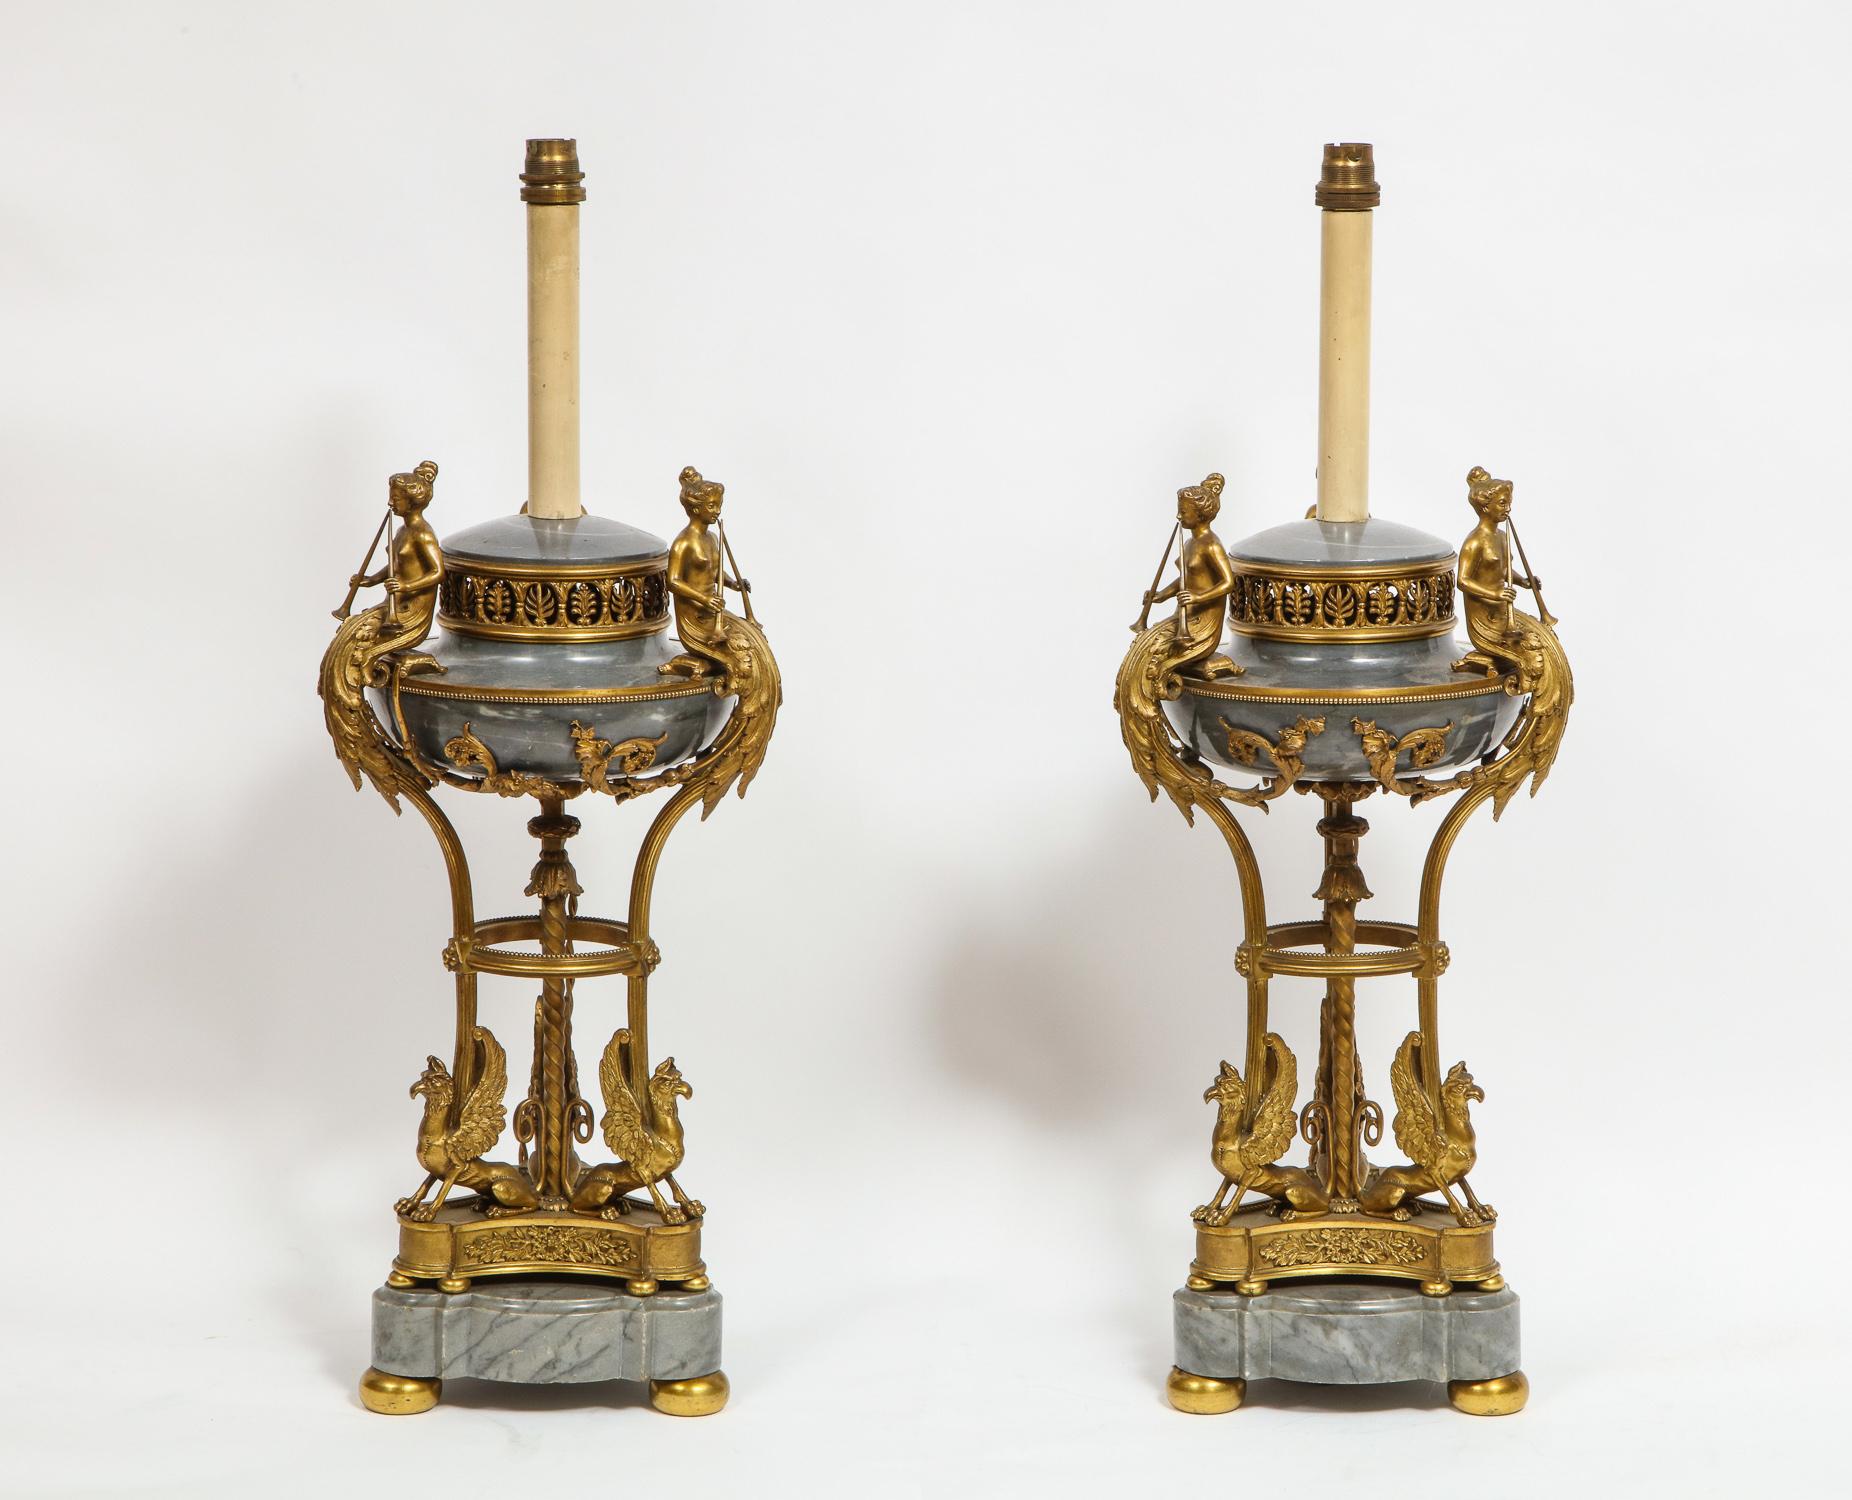 A rare pair of Louis XVI style, French ormolu bronze and gray marble brule parfums / vases converted to lamps,

Attributed to Paul Sormani Paris, circa 1880

Each with circular lid, above a pierced anthemion rim, the shallow body mounted with